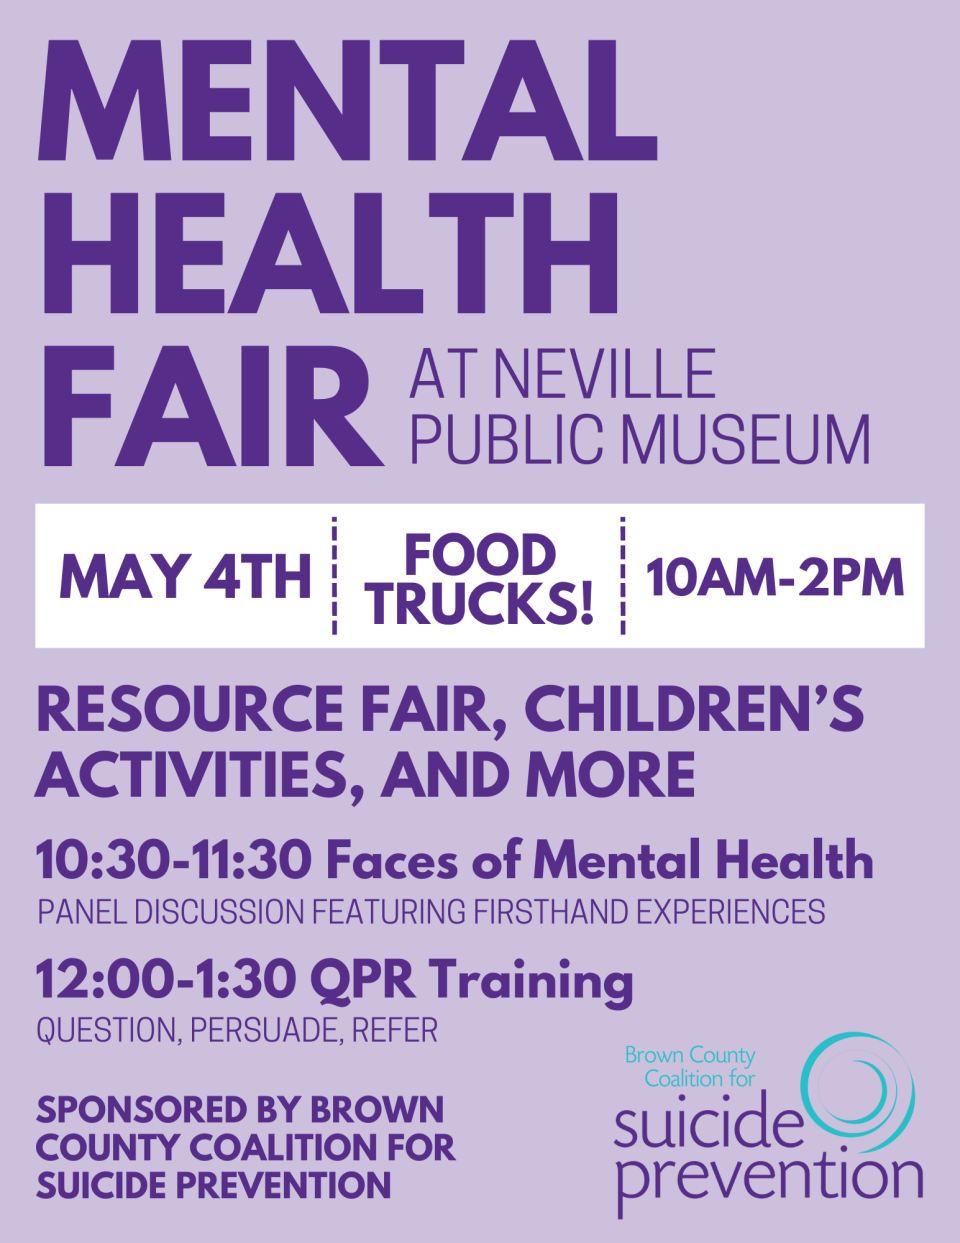 Poster for the free upcoming mental health fair from 10 a.m. to 2 p.m. May 4 at the Neville Public Museum.